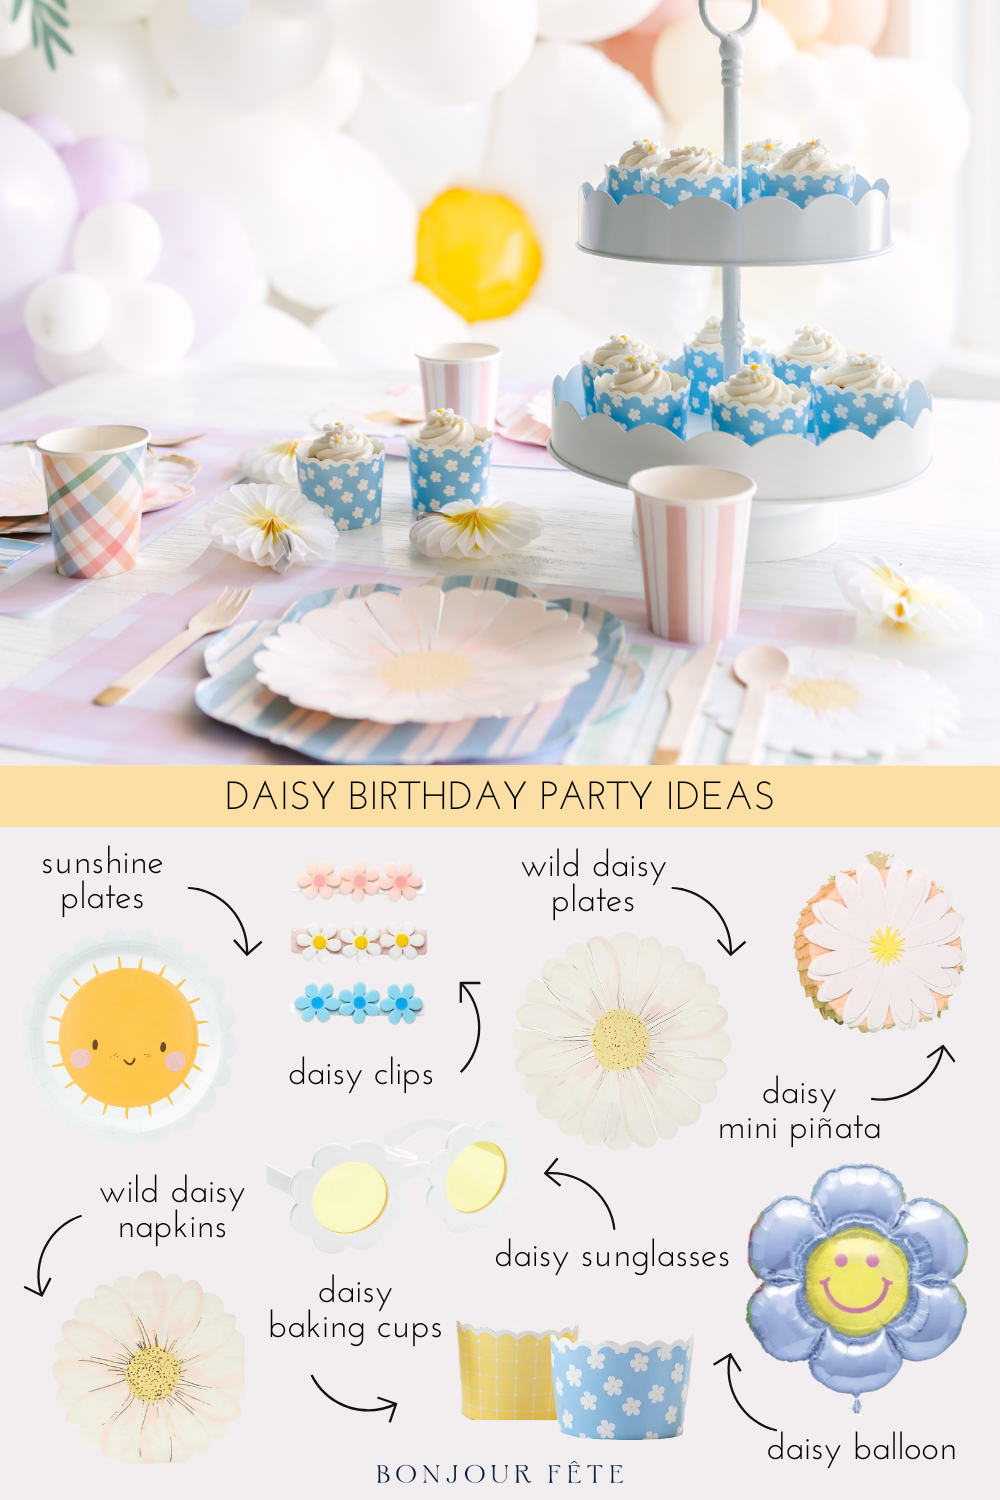 Daisy party ideas and daisy party supplies.